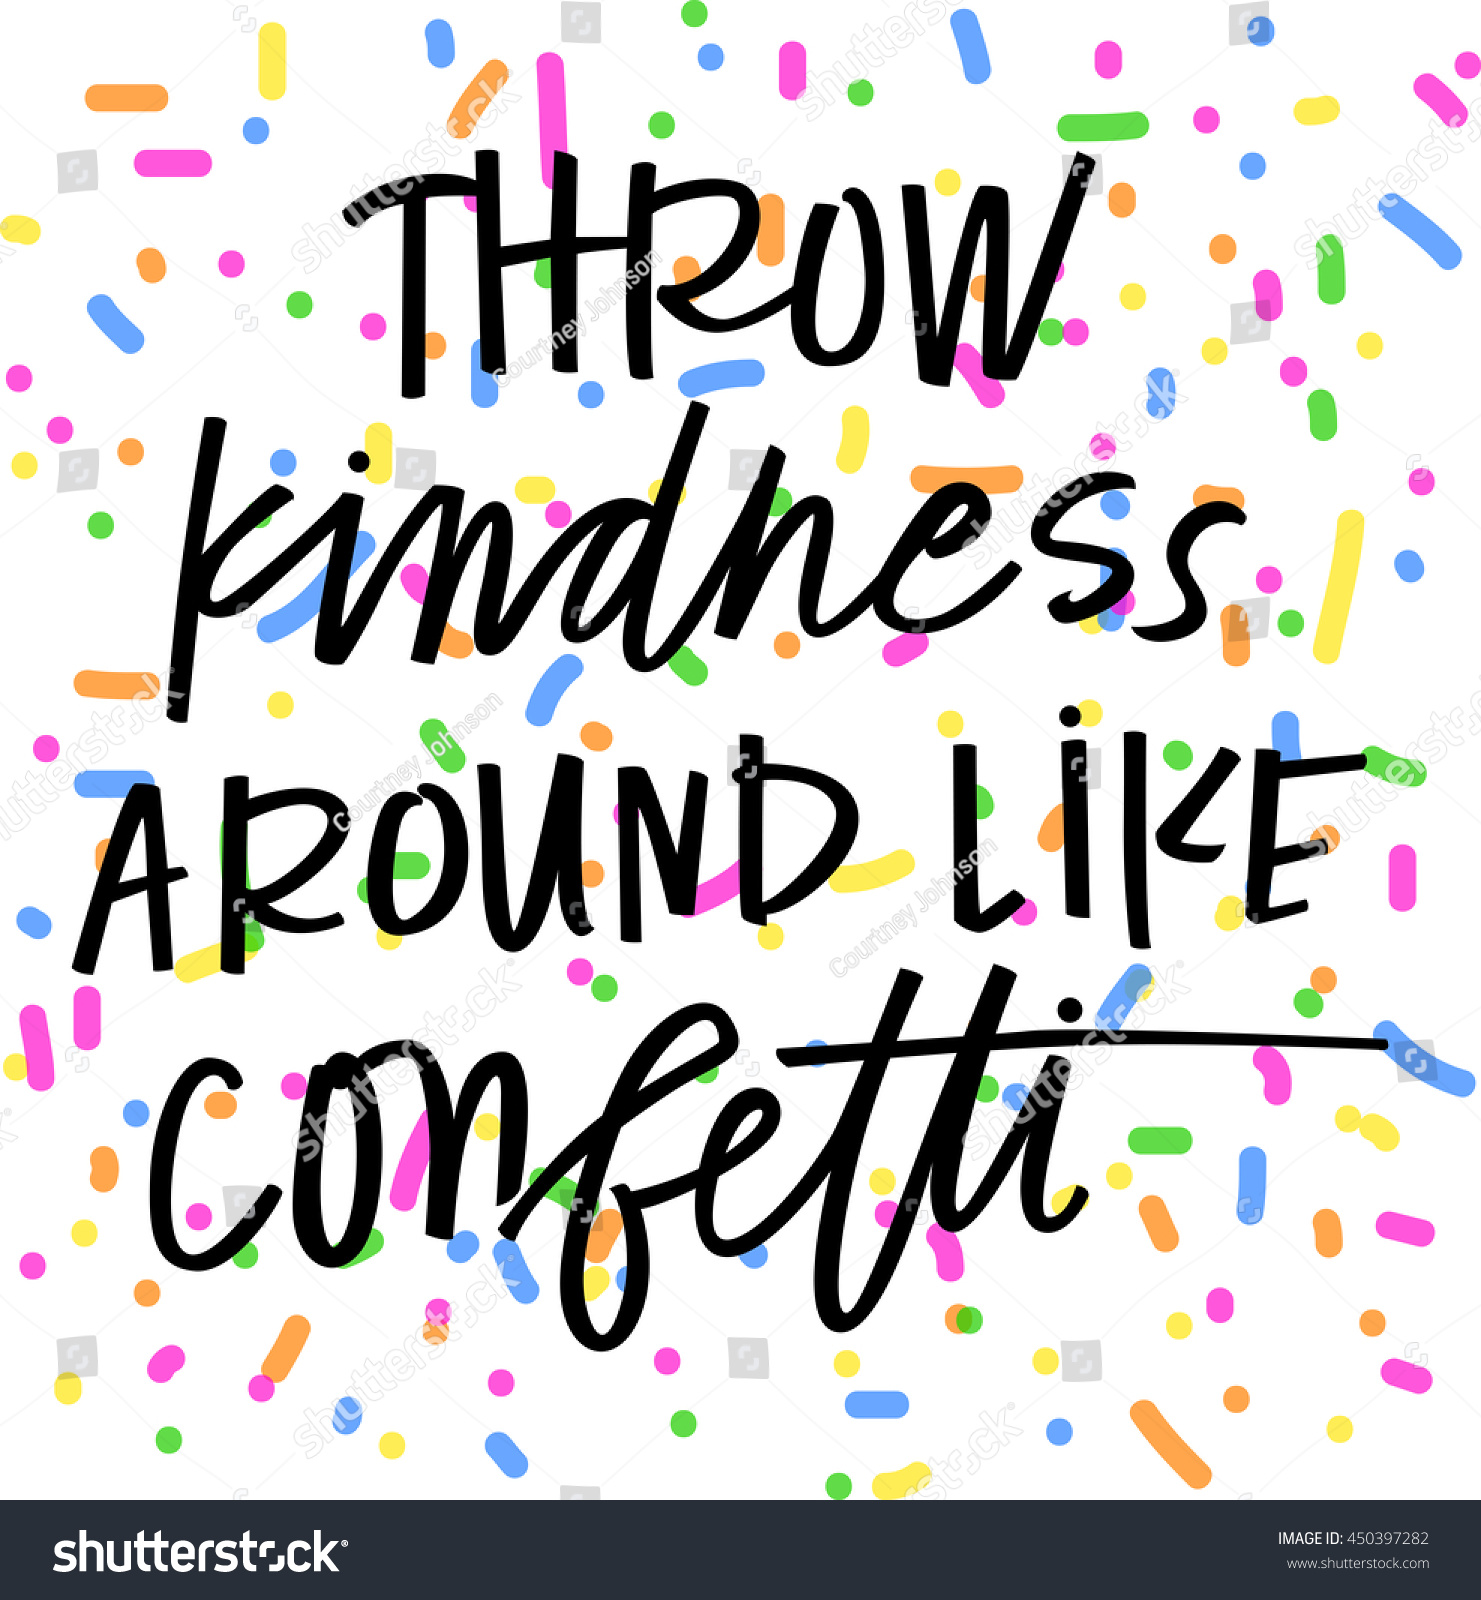 Like around. Nobody like me Confetti. Let it be Kindness around the World.